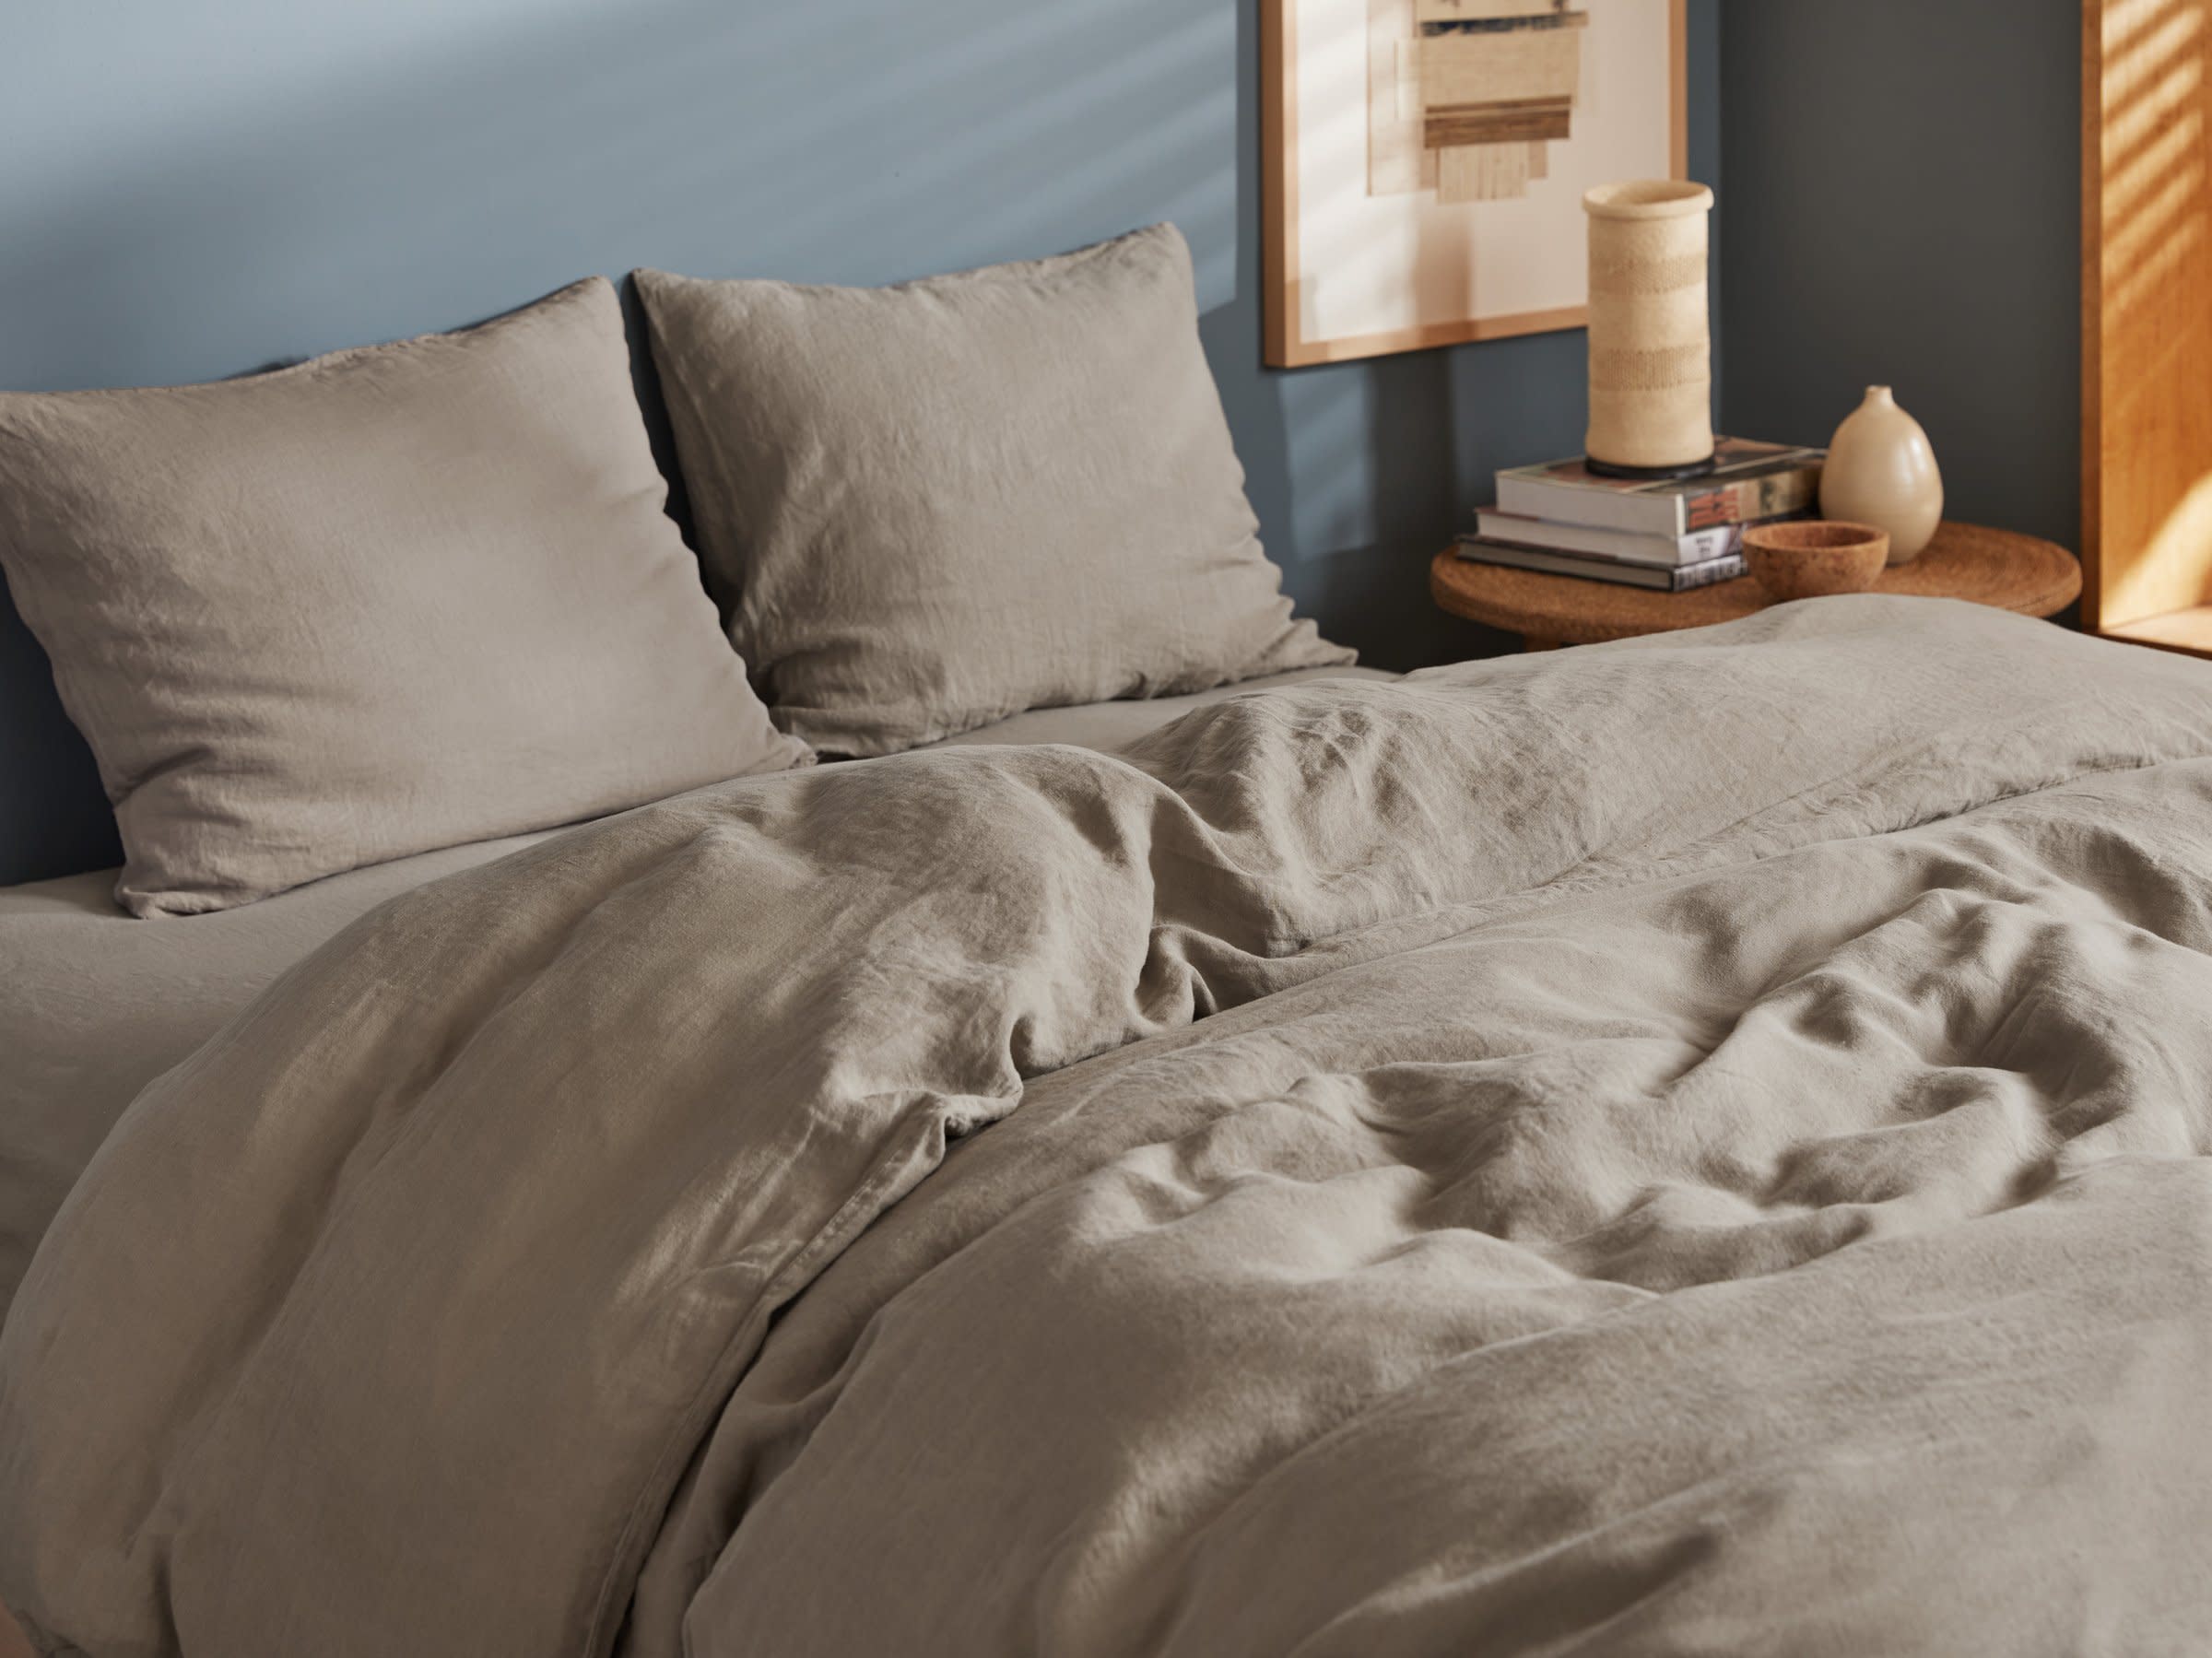 Fawn Linen Duvet Cover Shown In A Room